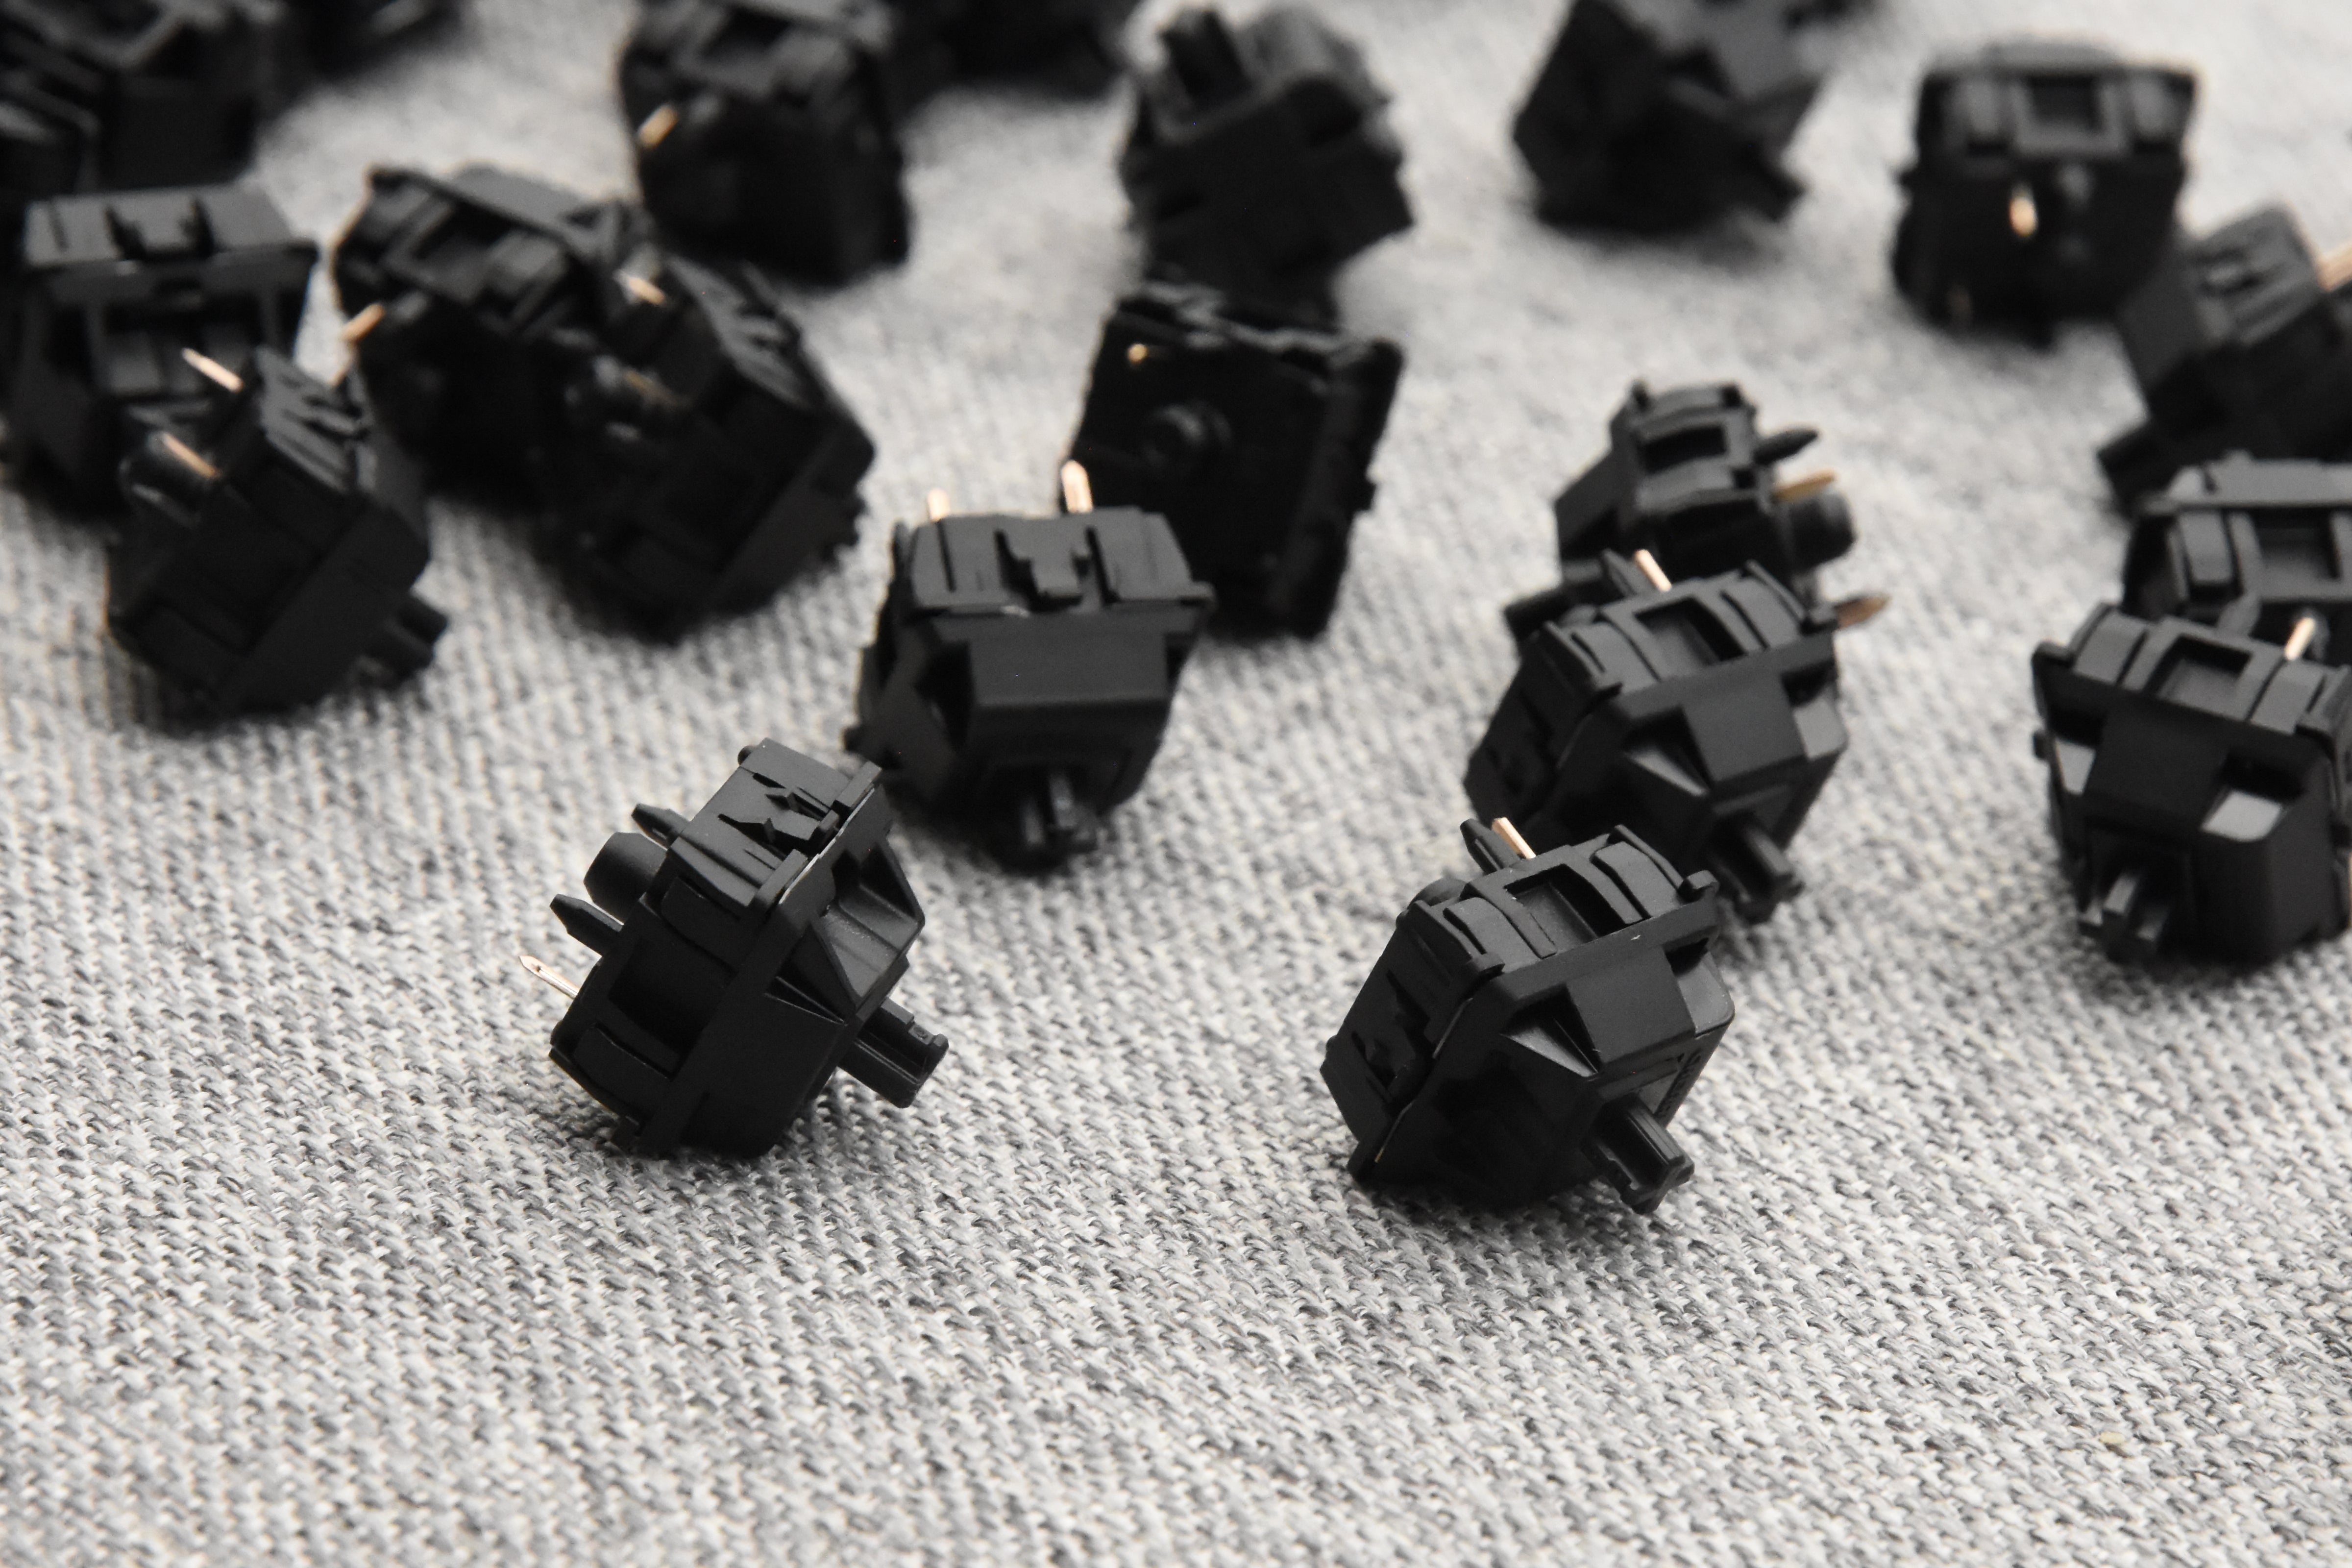 LUBED, FILMED, AND SPRING SWAPPED CHERRY MX SWITCHES (10PCS)